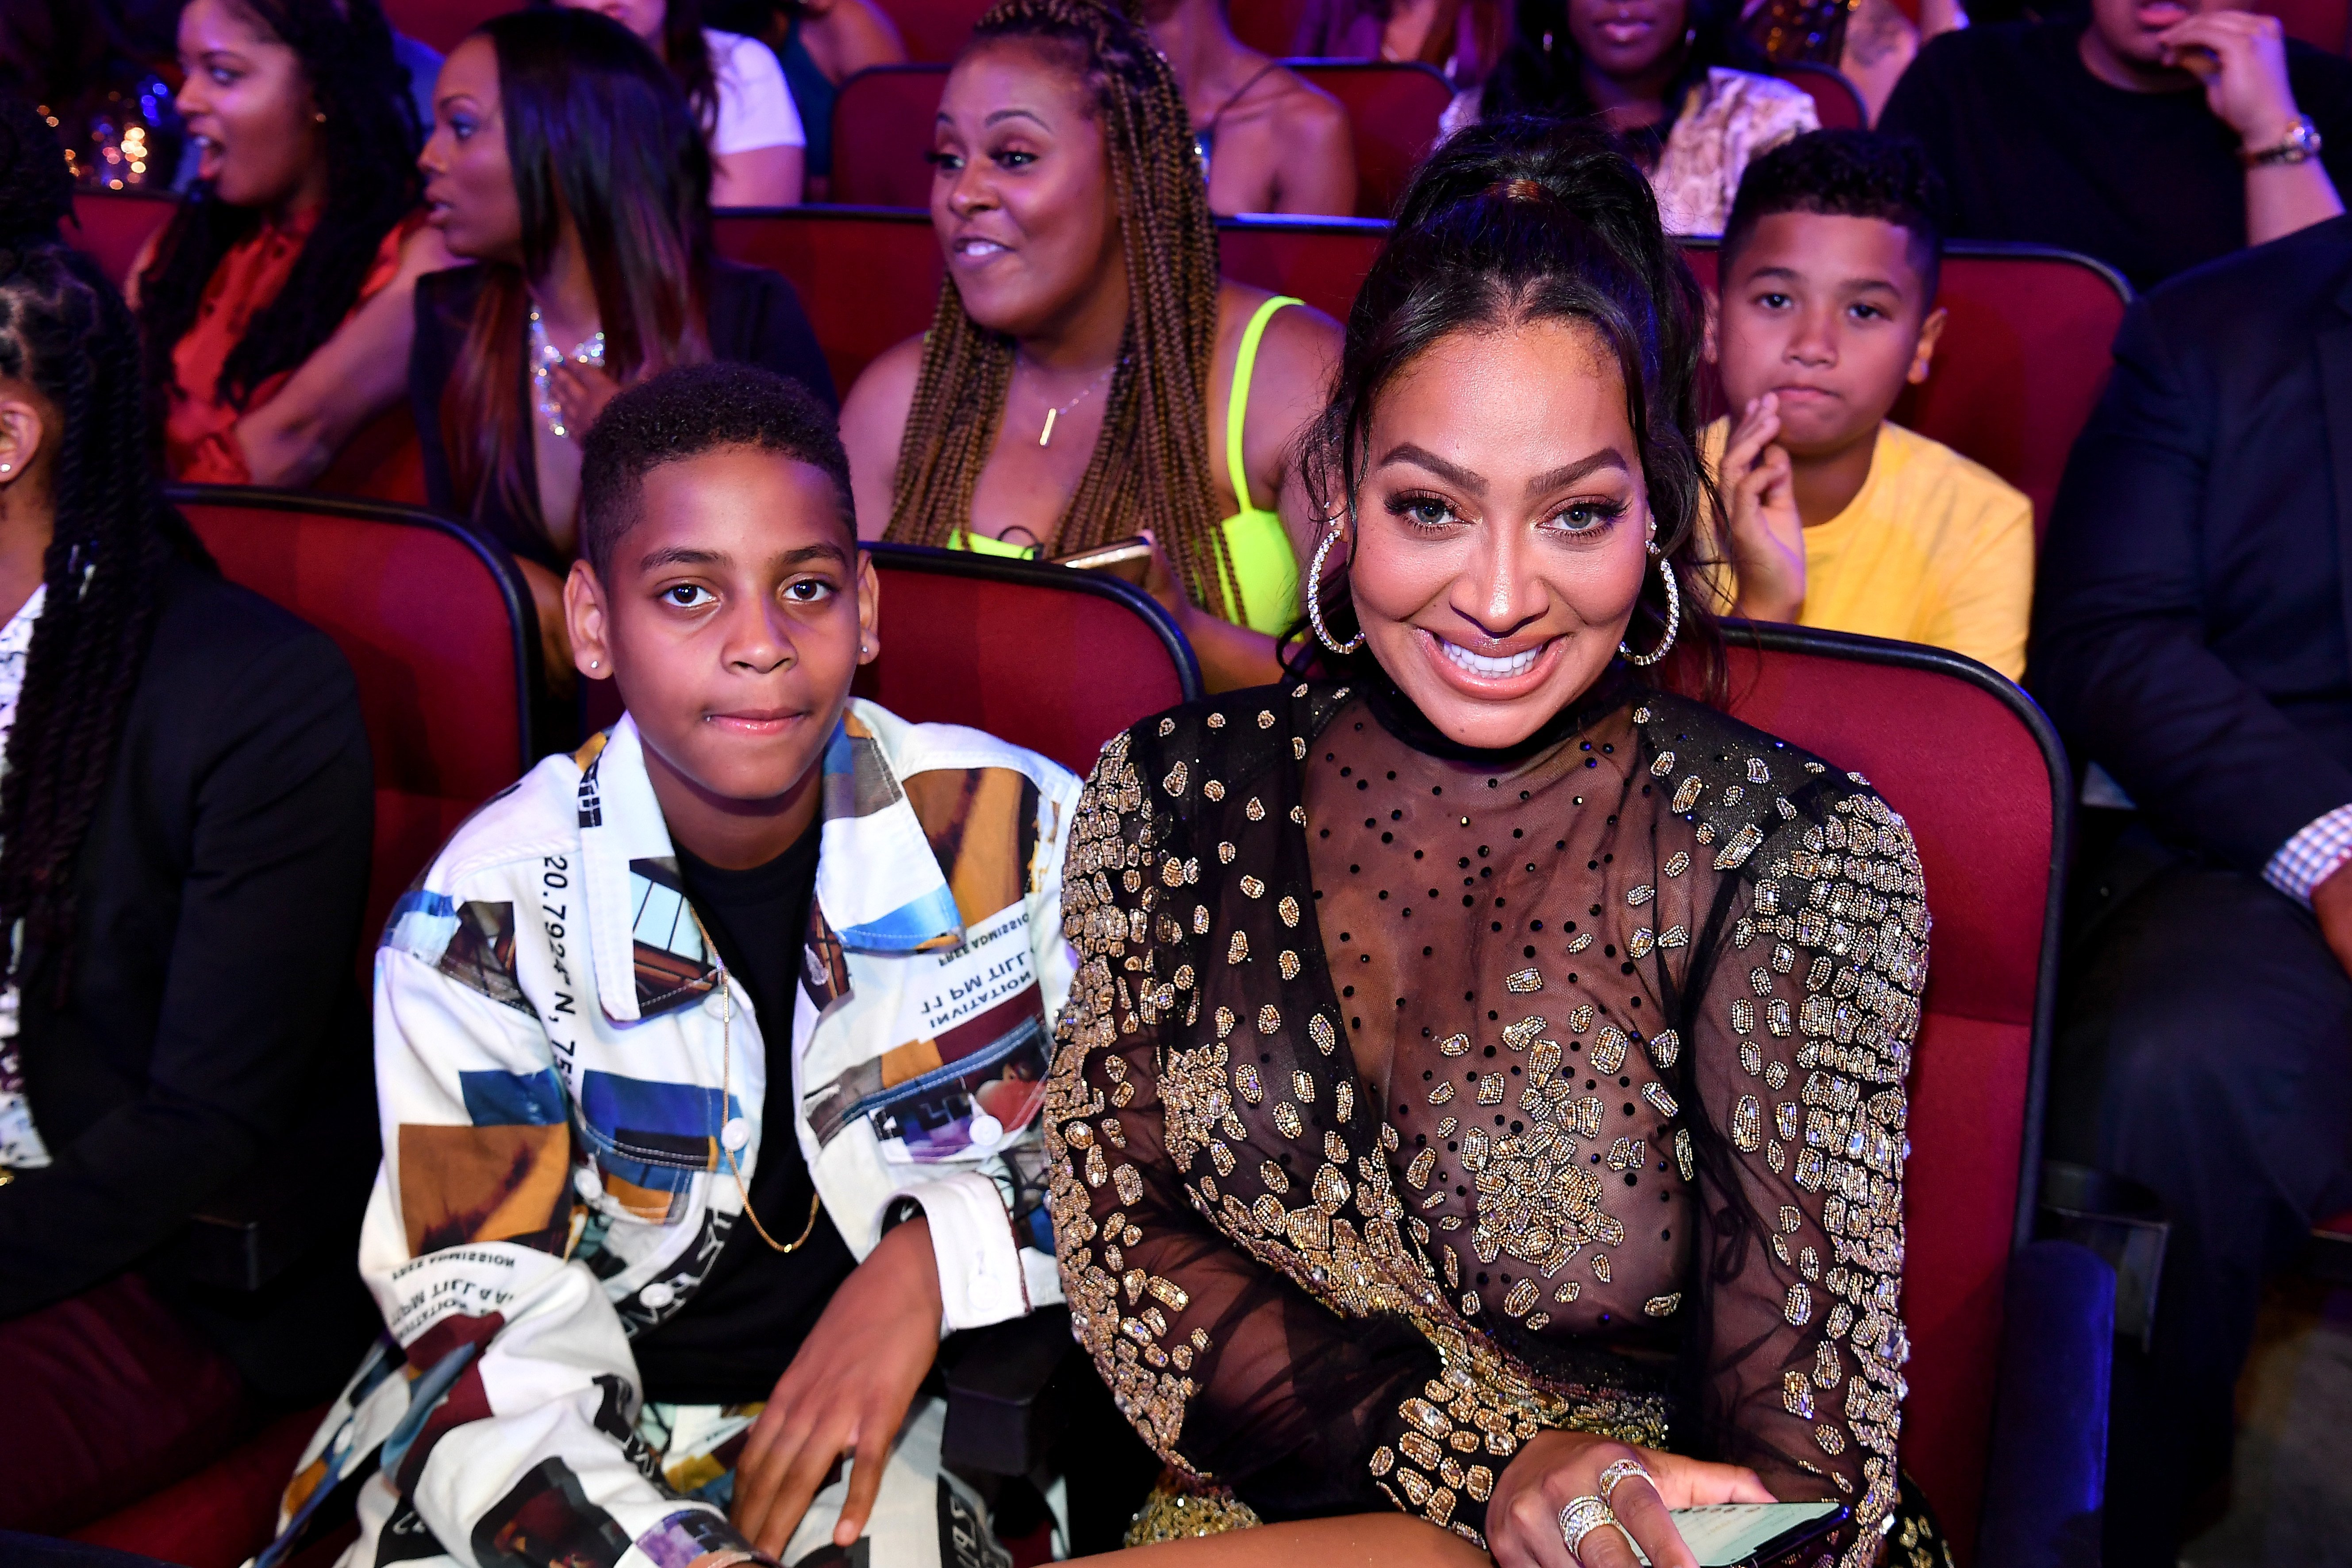 La La Anthony and her son with Carmelo Anthony, Kiyan, at the 2019 BET Awards. | Photo: Getty Images